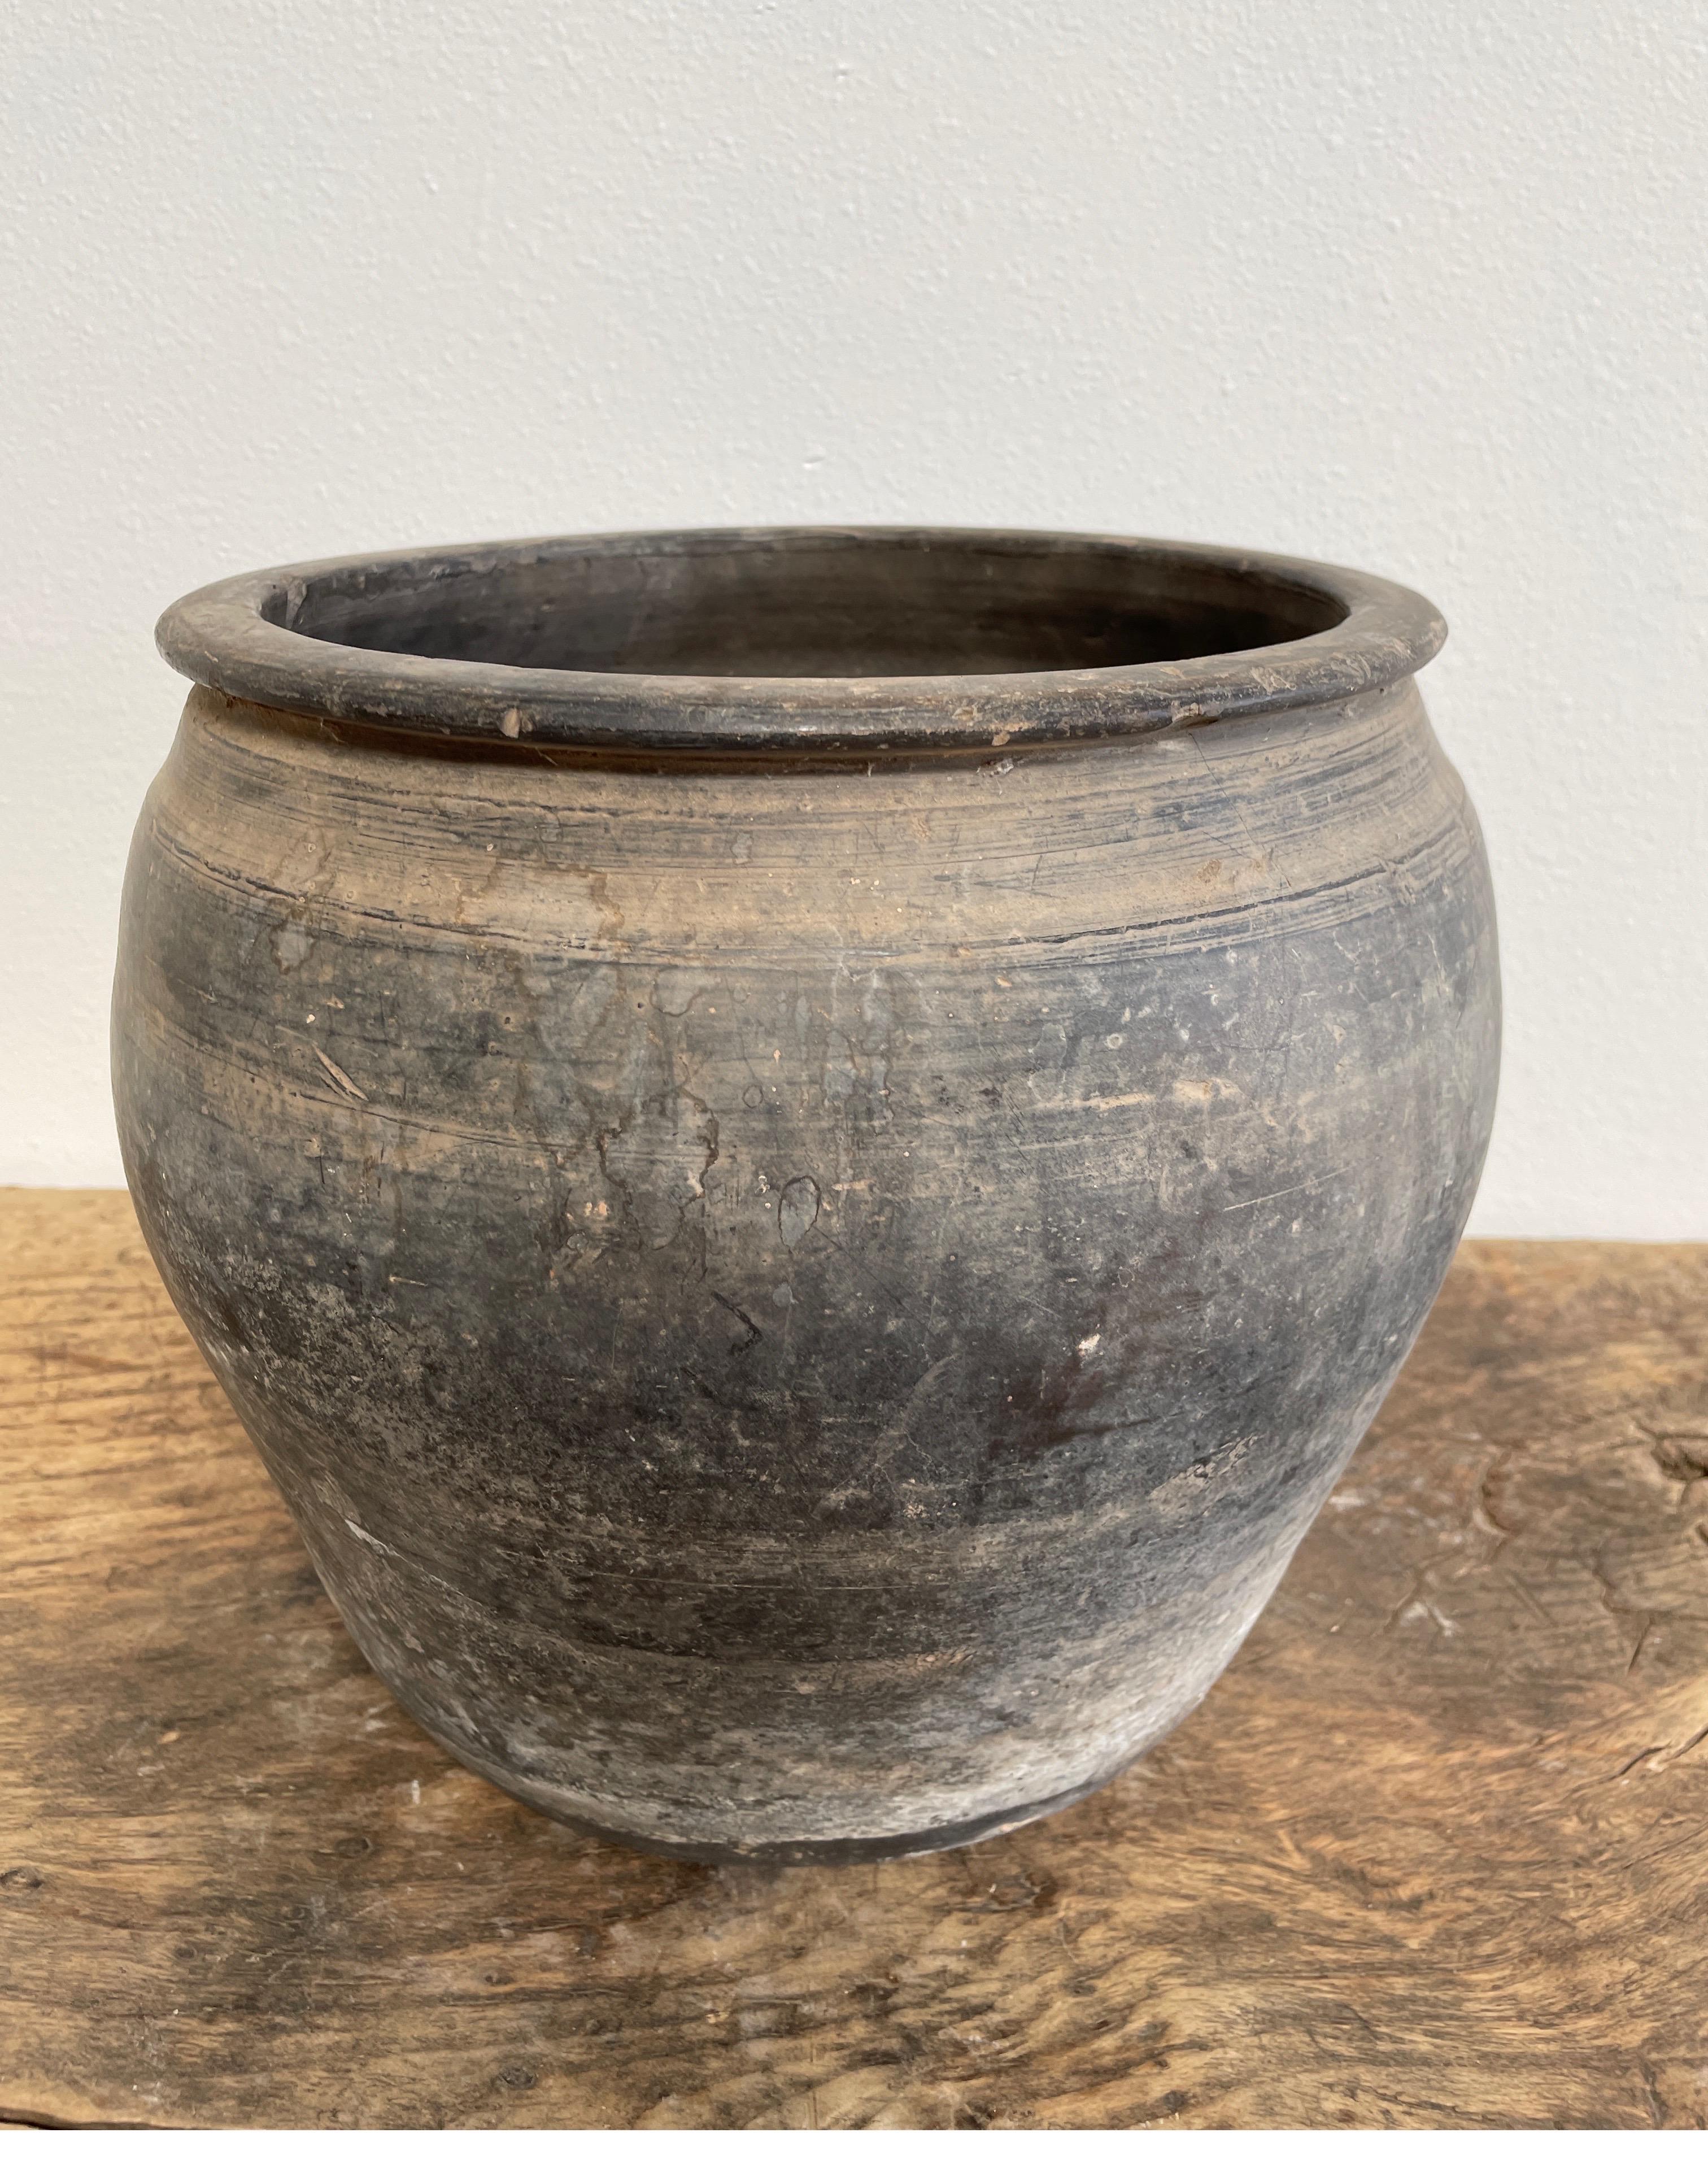 Vintage Pottery
Beautiful and rich in character, this vintage glazed oil pot adds just the right amount of texture + warmth where you need it. Stunning faded black/ brown unglazed finish with warm terra-cotta accents.
Some have a more faded